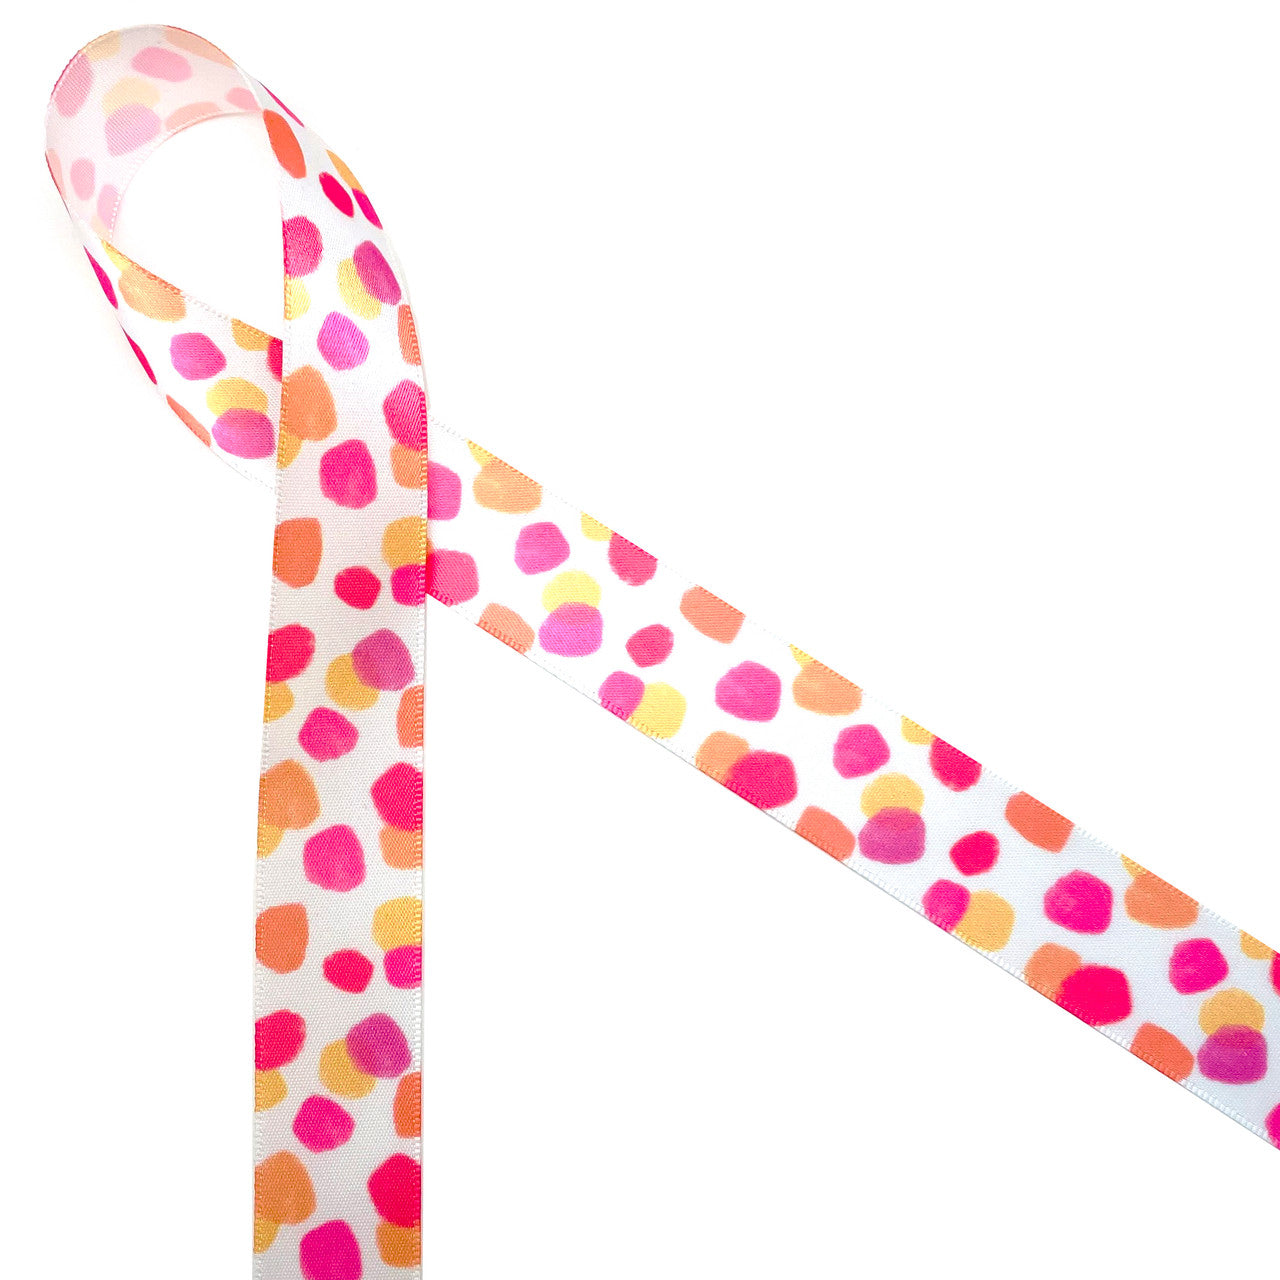 Water color dots are trending! Our water color dots of pink, yellow and  coral printed on 7/8" white single face satin ribbon is the perfect addition to quilting, sewing and craft projects. Use this ribbon for fun Spring events, bridal showers and dessert tables. All our ribbon  is designed and printed in the USA